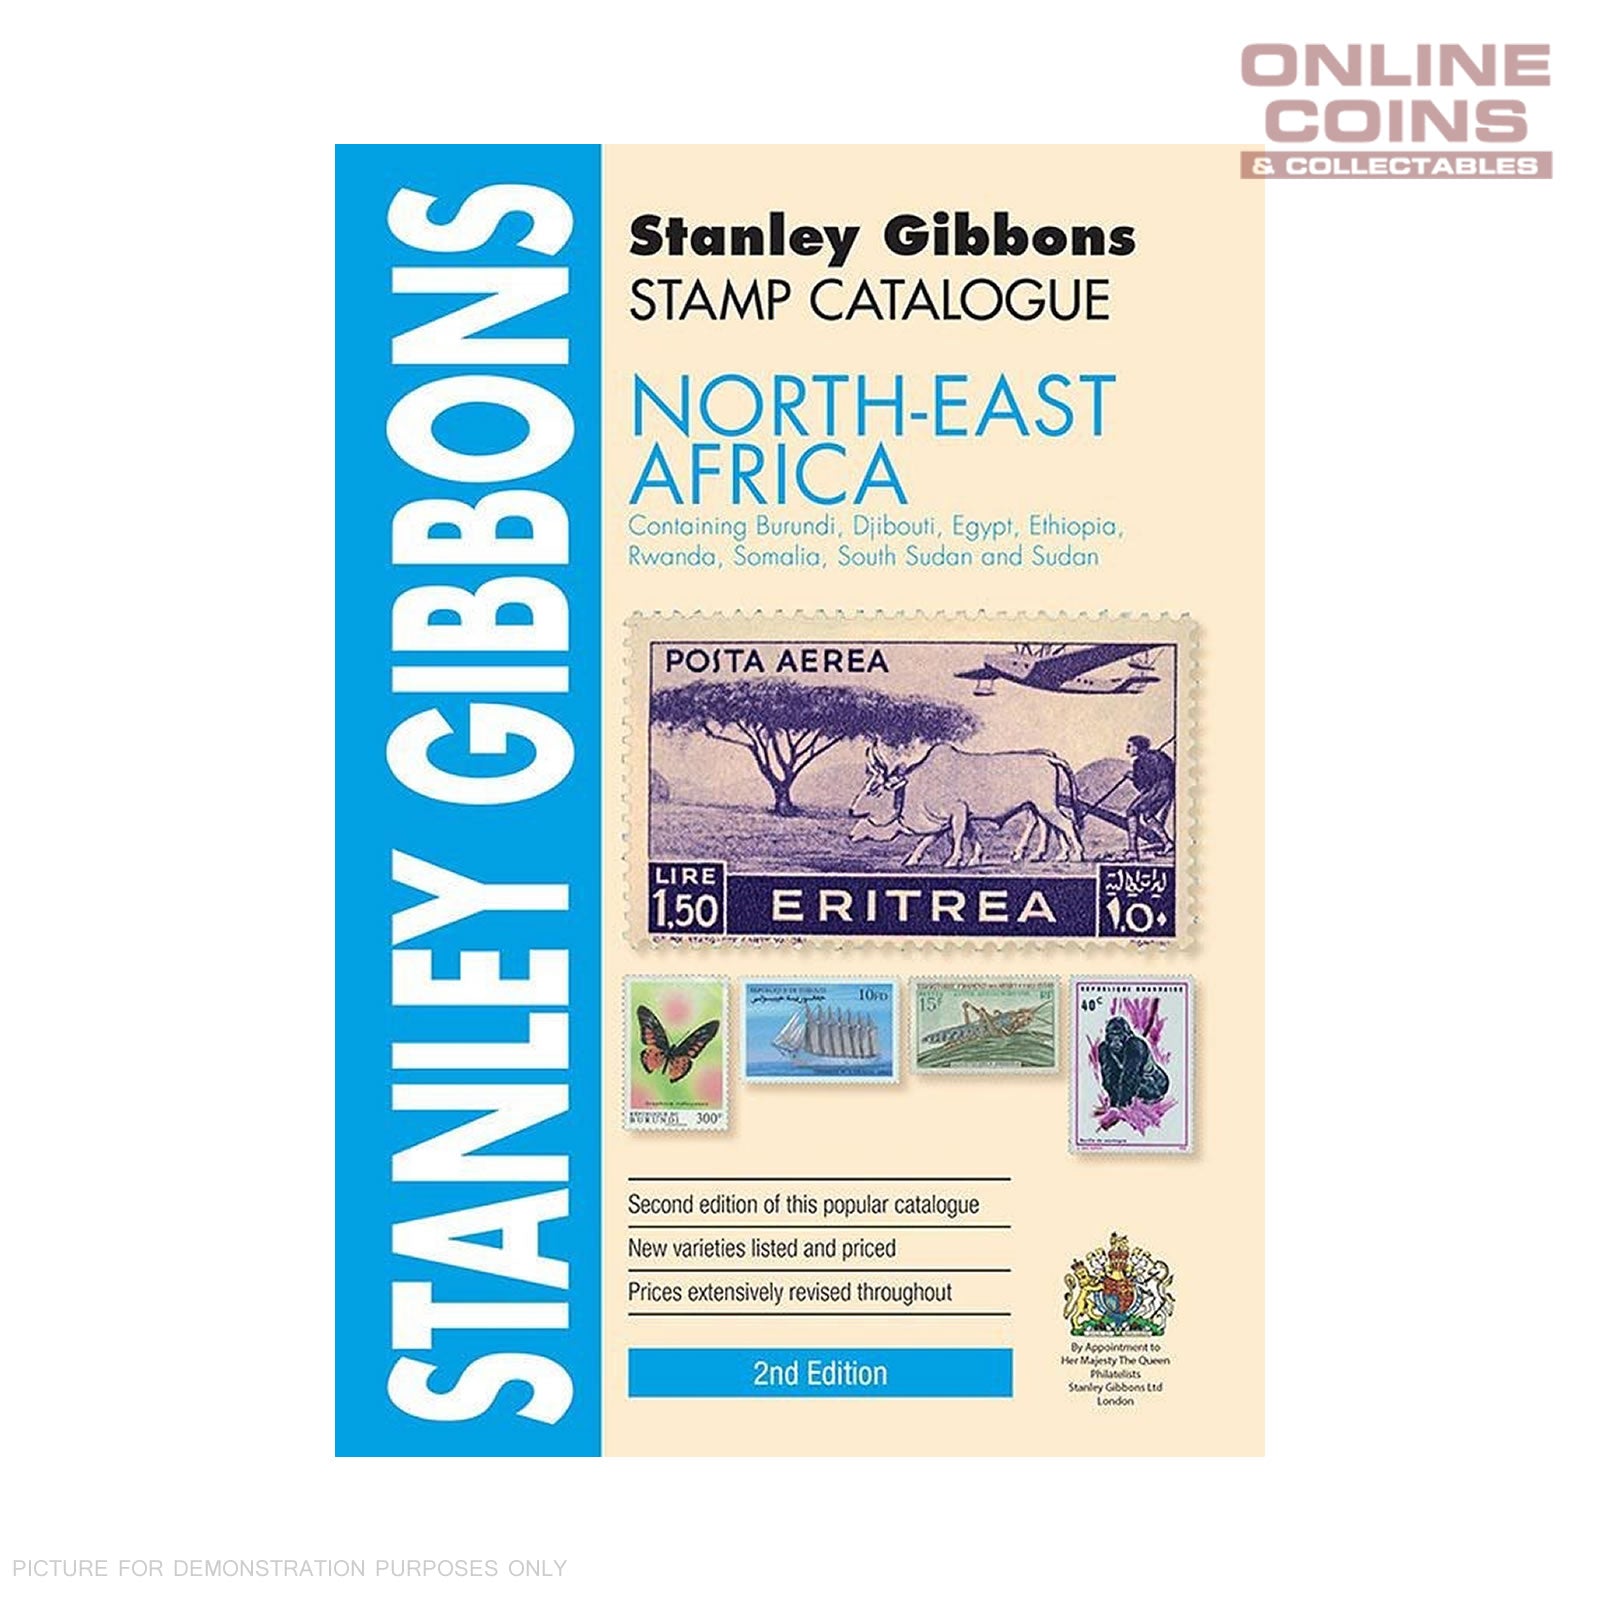 2017 Stanley Gibbons - Stamp Catalogue North East Africa Catalogue 2nd Edition